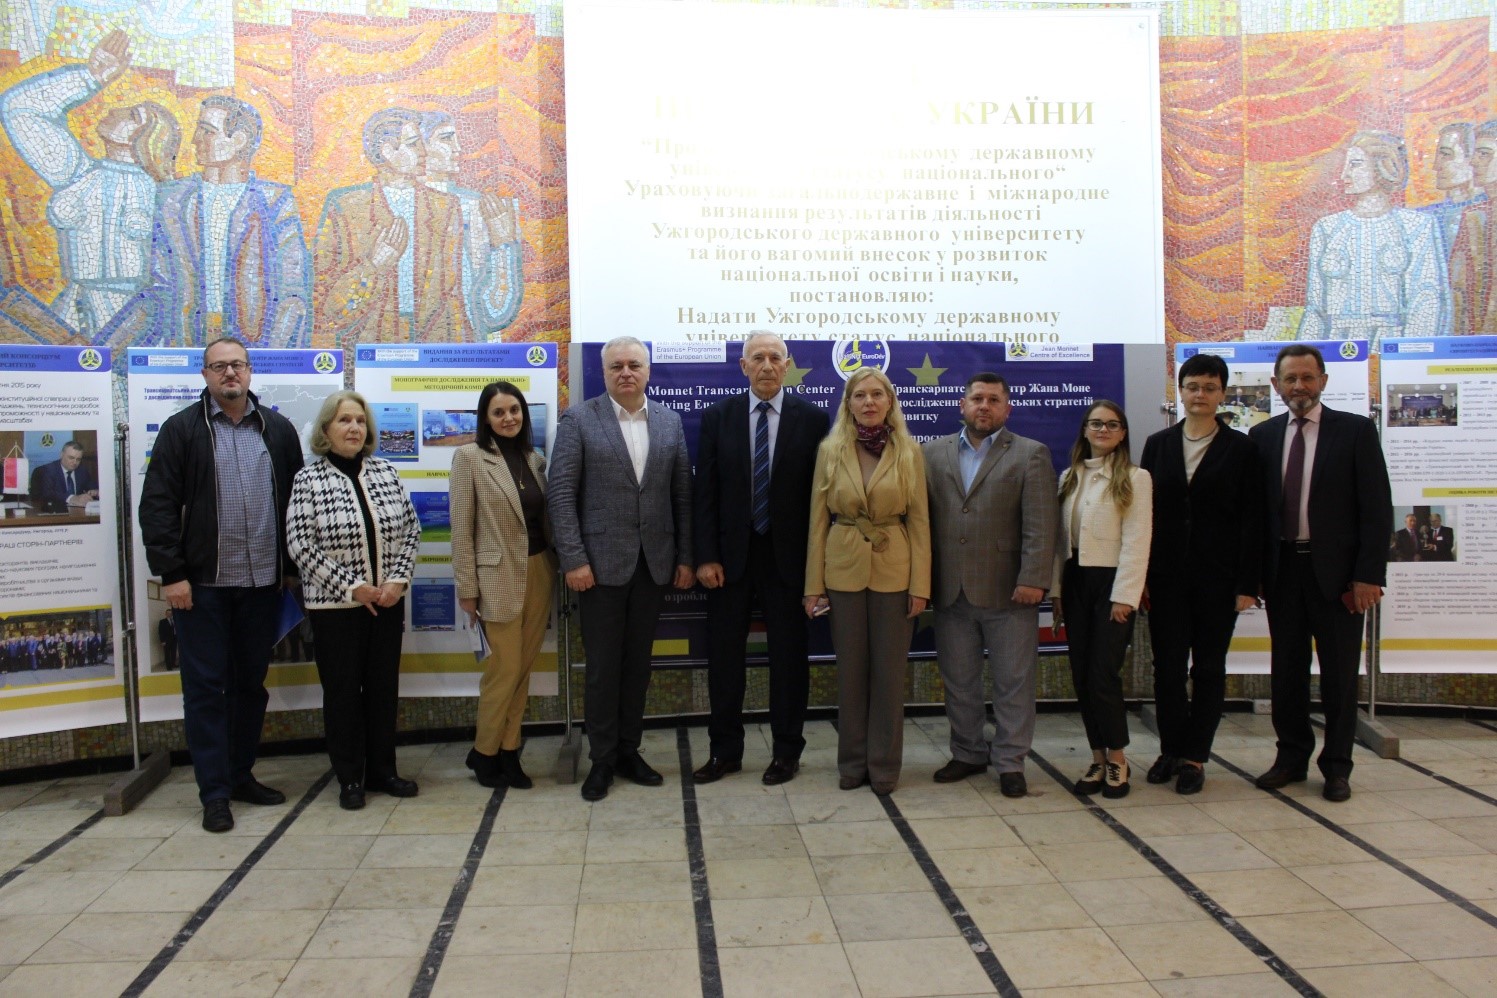 The final meeting on the occasion of the completion of the project and the Exhibition-presentation of the directions of the scientific project   ‘Jean Monnet Transcarpathian Center for Studying European Development Strategies at Uzhhorod National Universi